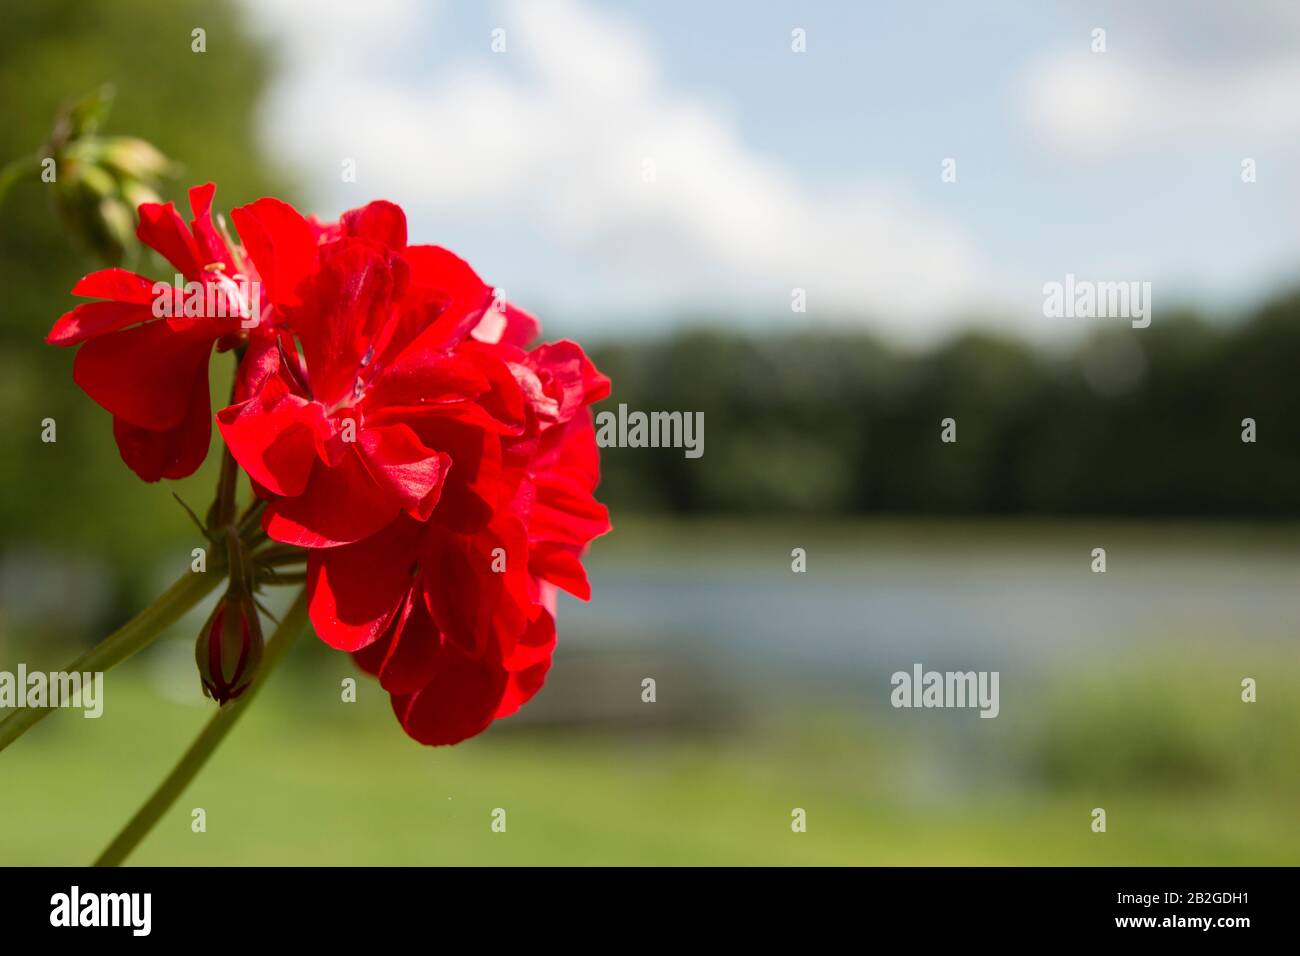 Big red flower with lake and blue sky as background Stock Photo